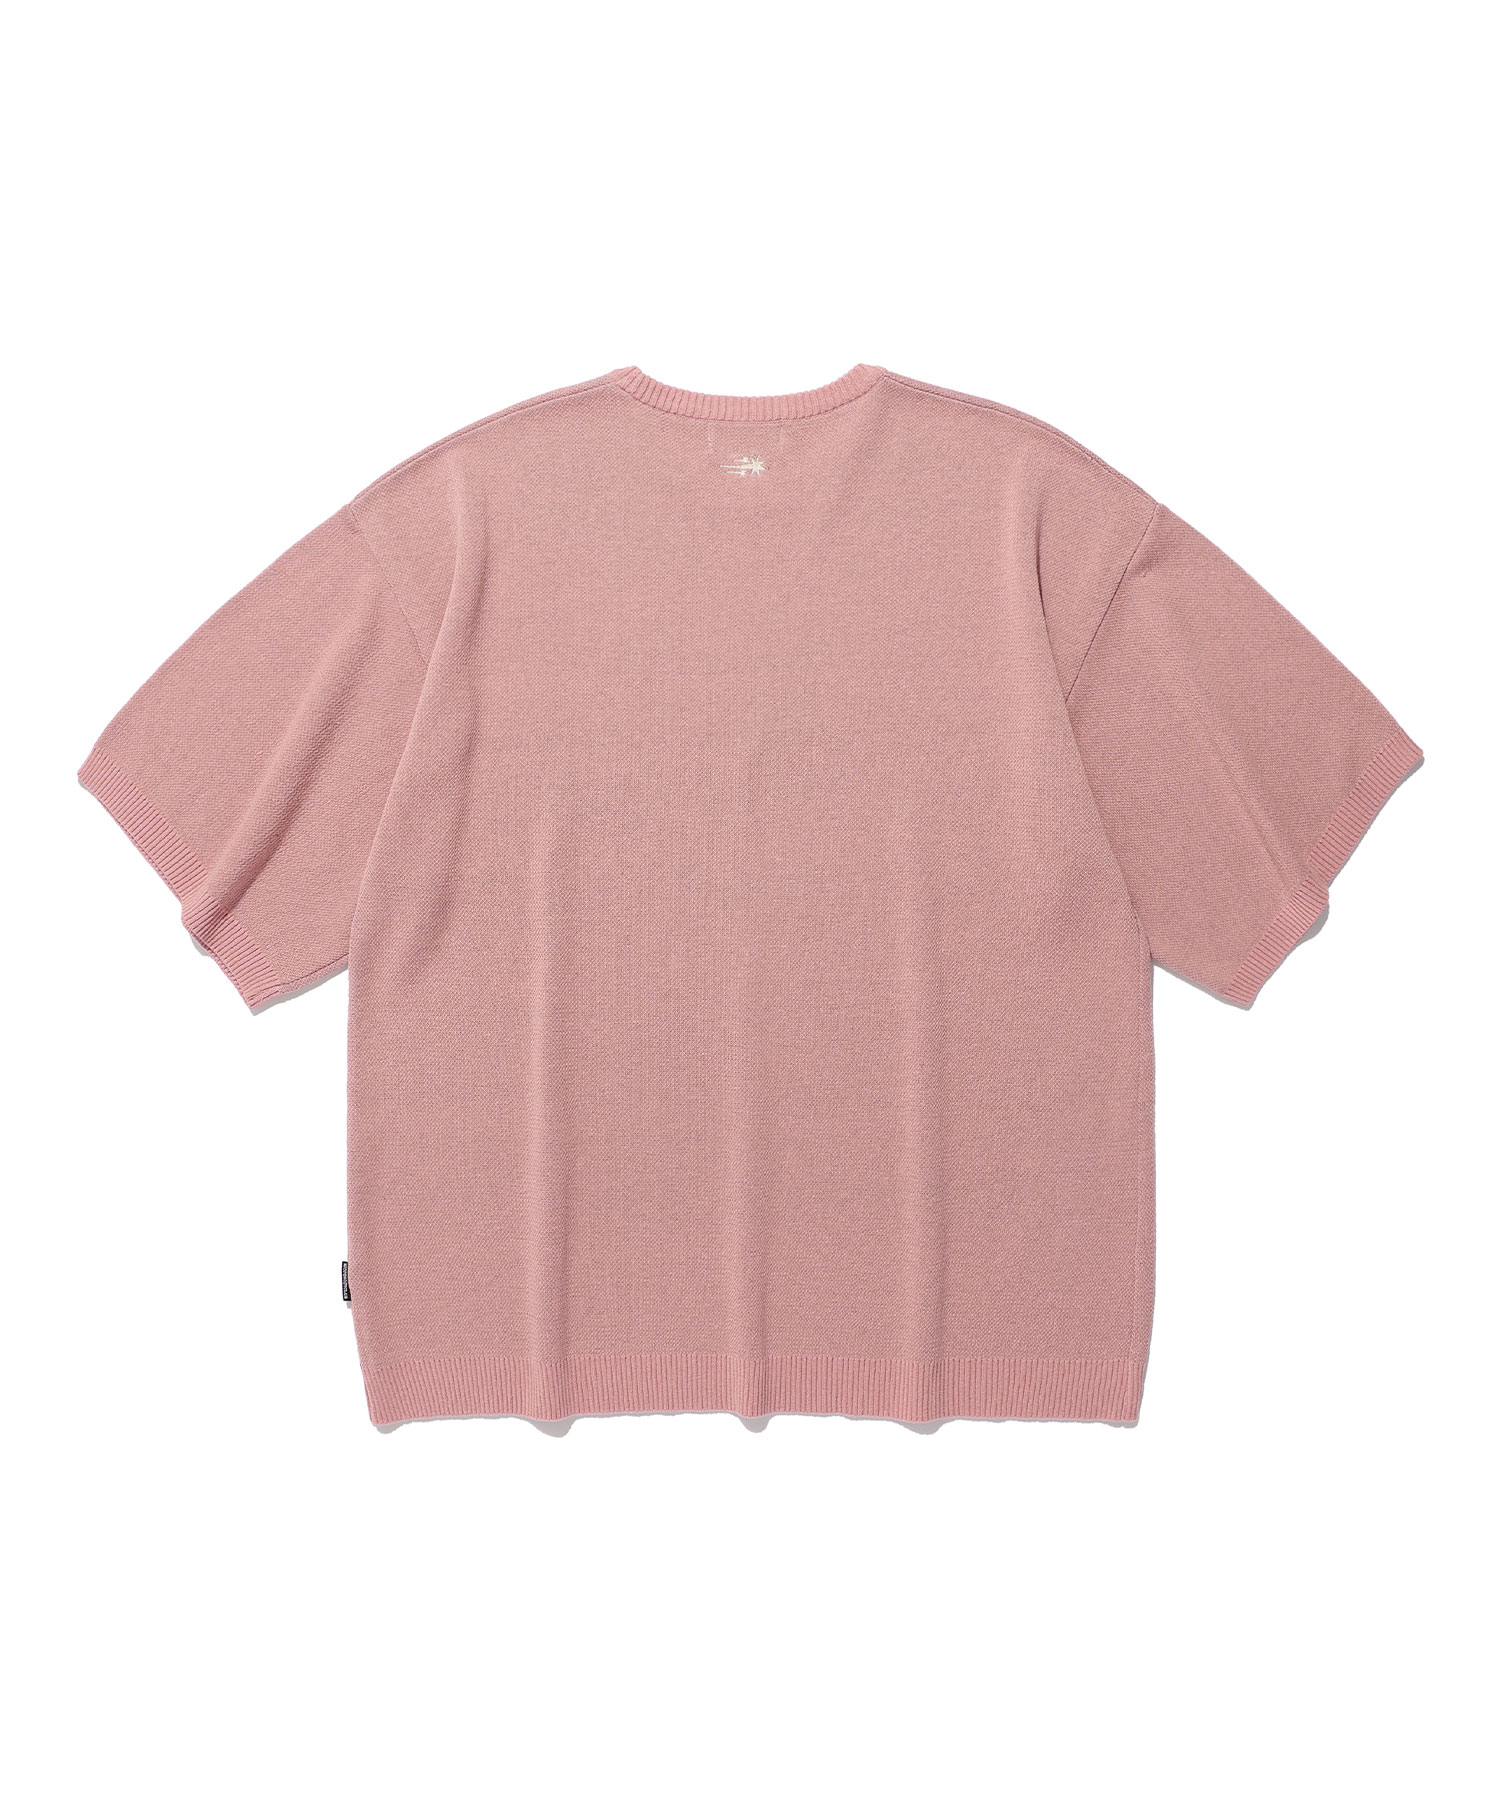 KIDNAPPING BIG BIG KNIT TEE[DUST PINK]